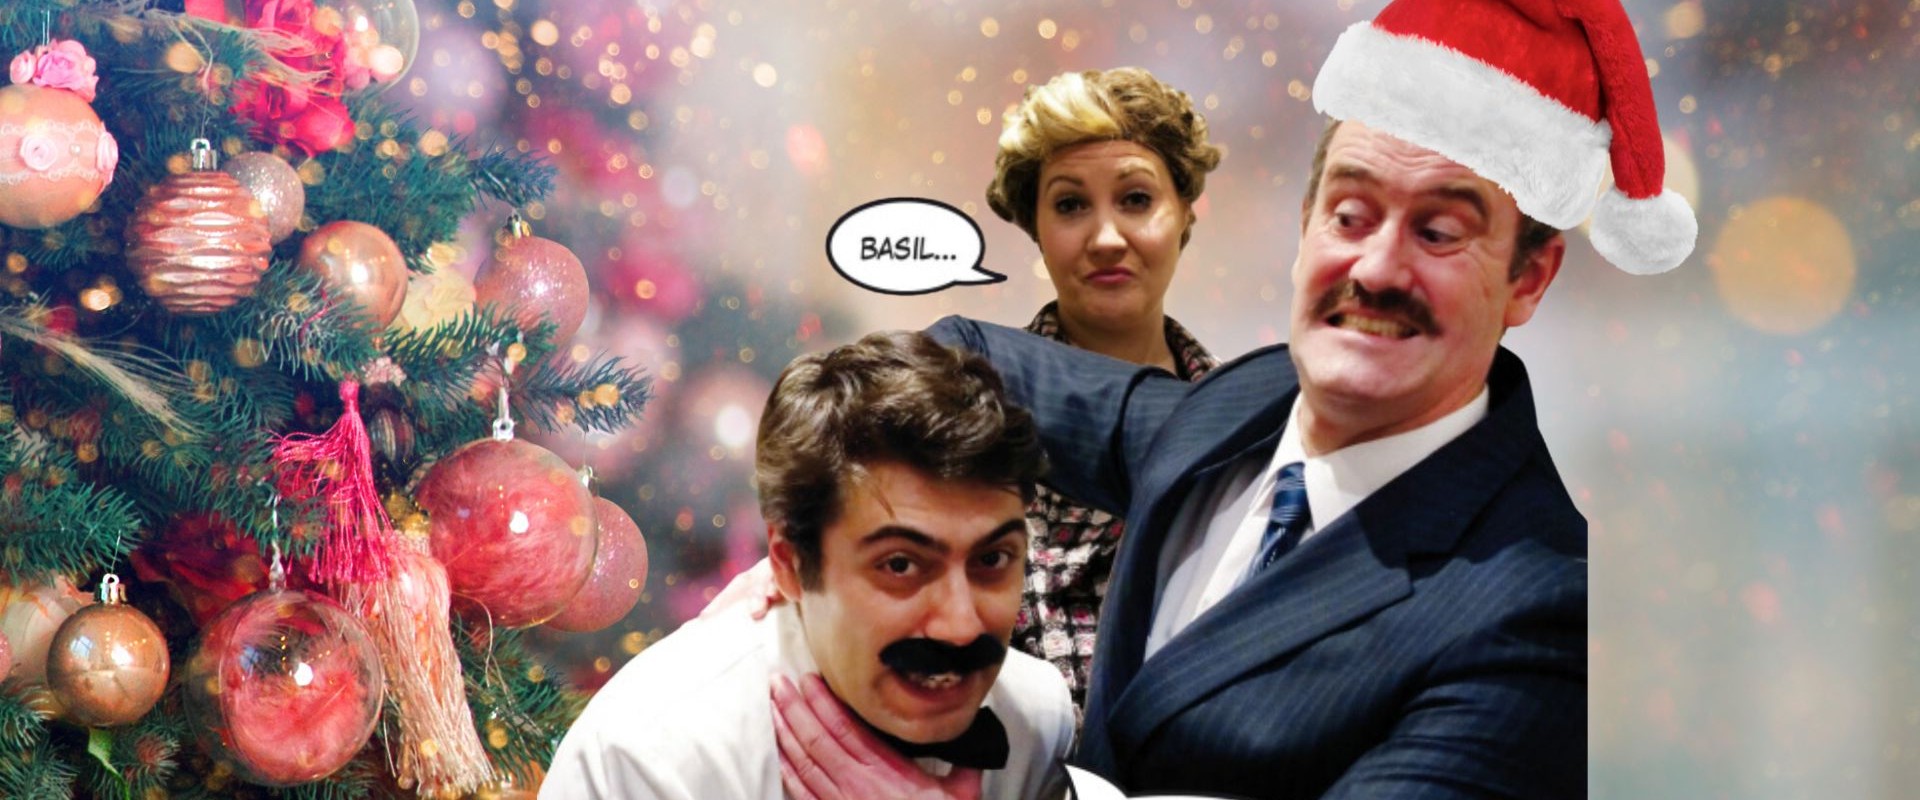 Fawlty Towers Christmas